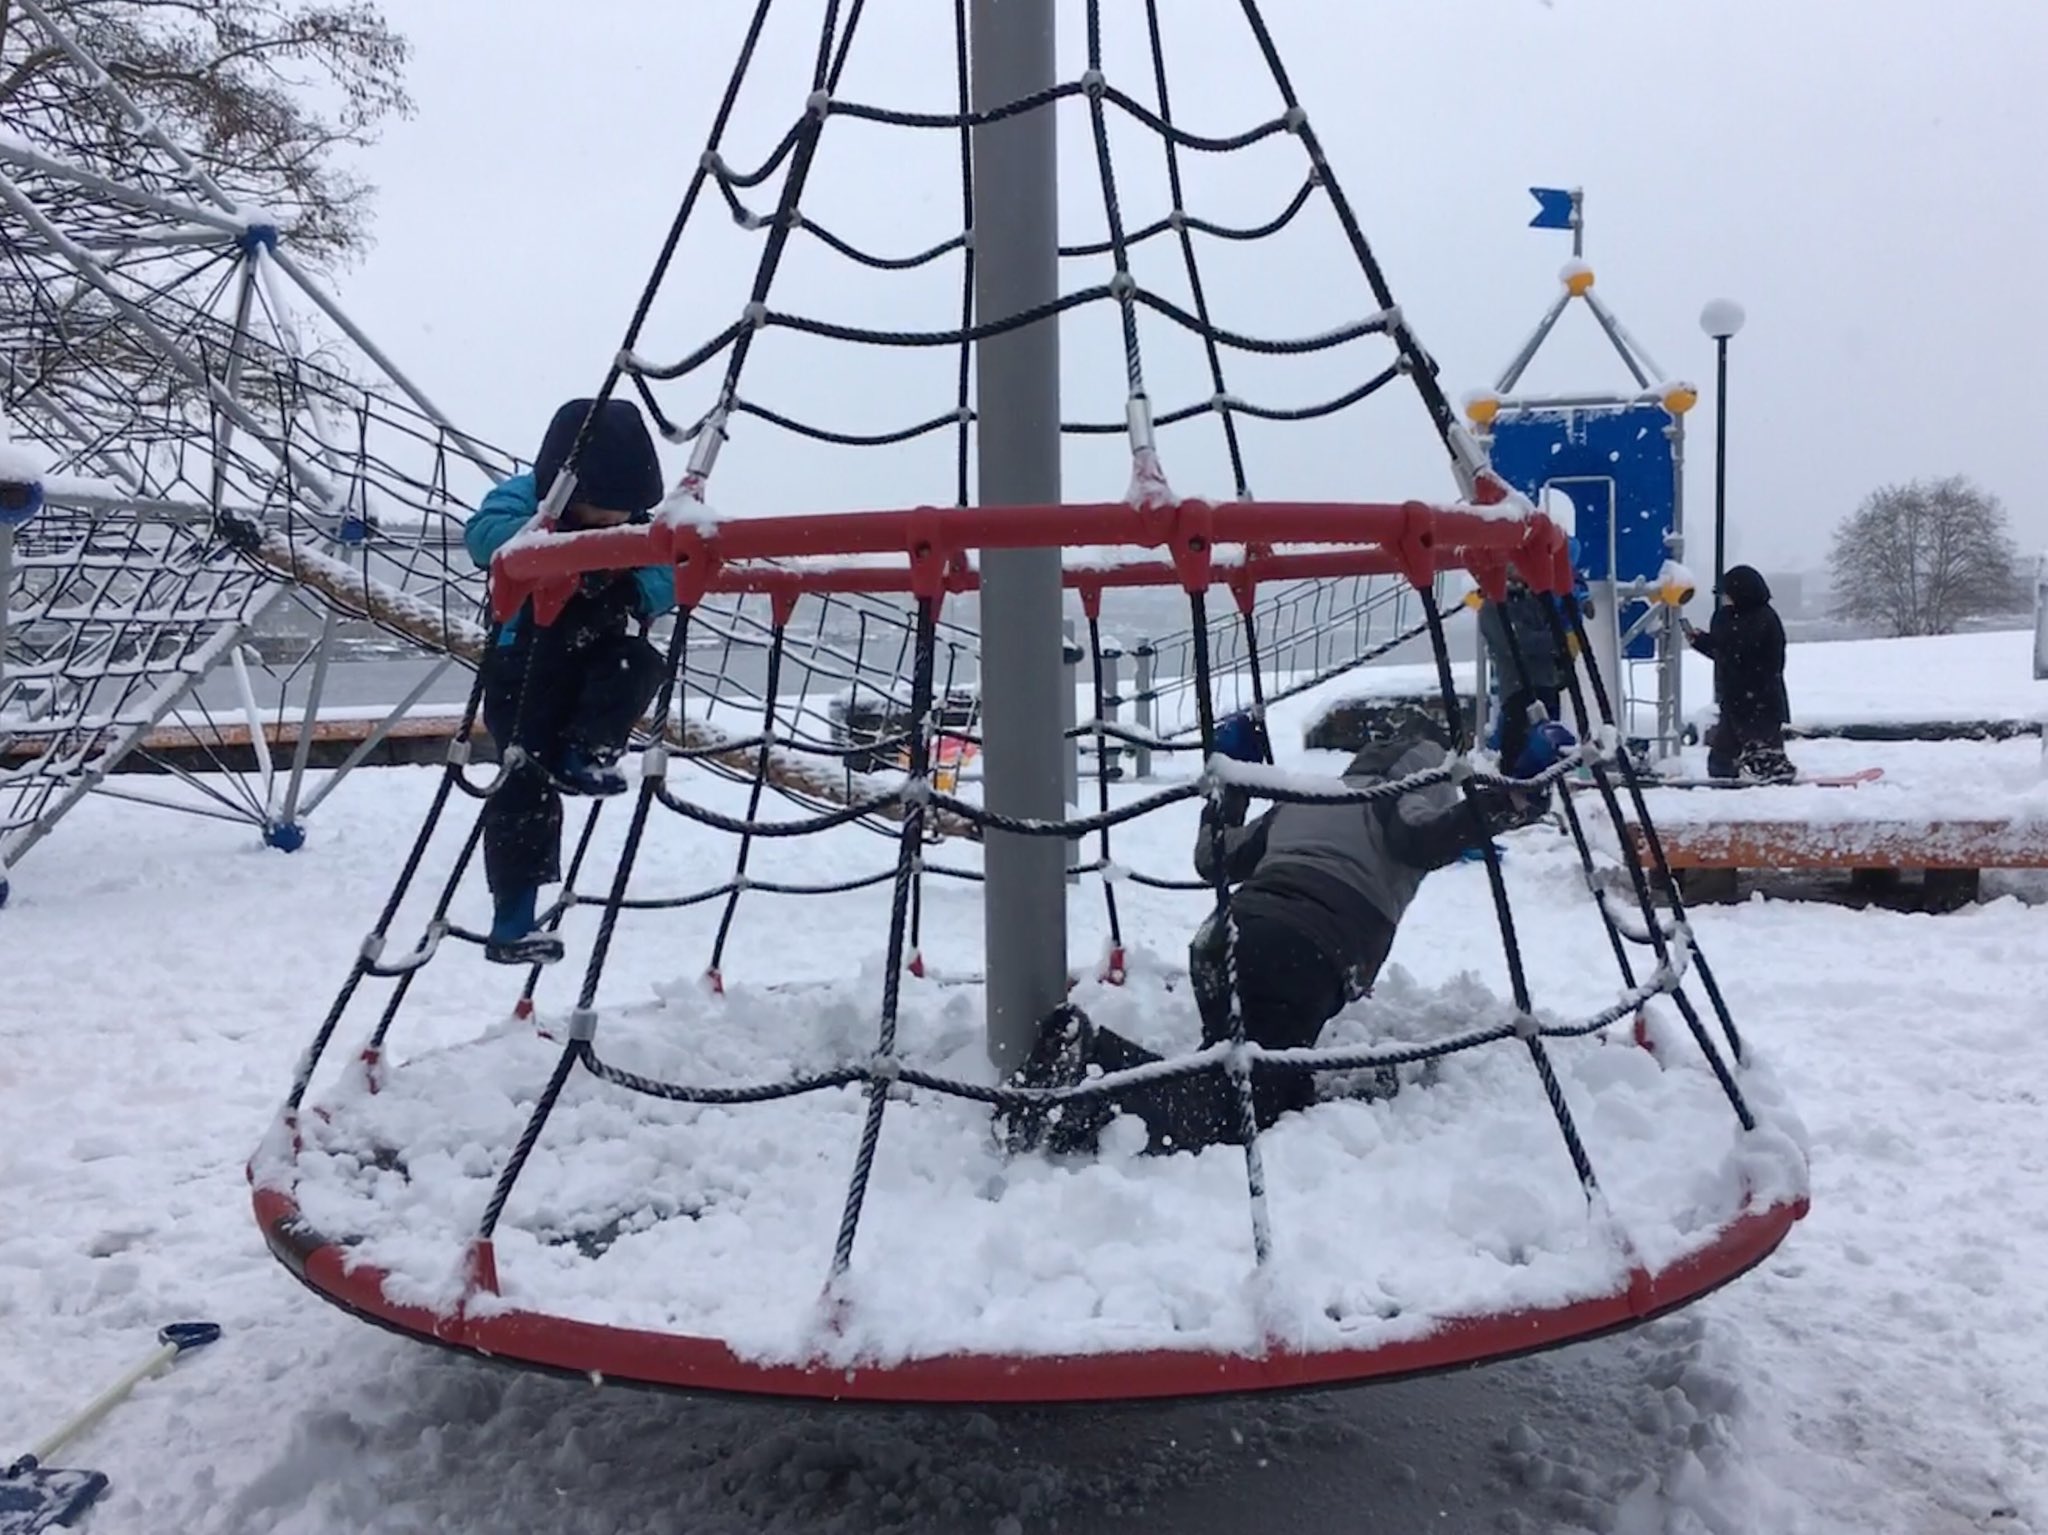 Calvin and Julian, bundled up in snow clothes, are on a pyramid shaped piece of playground equipment.